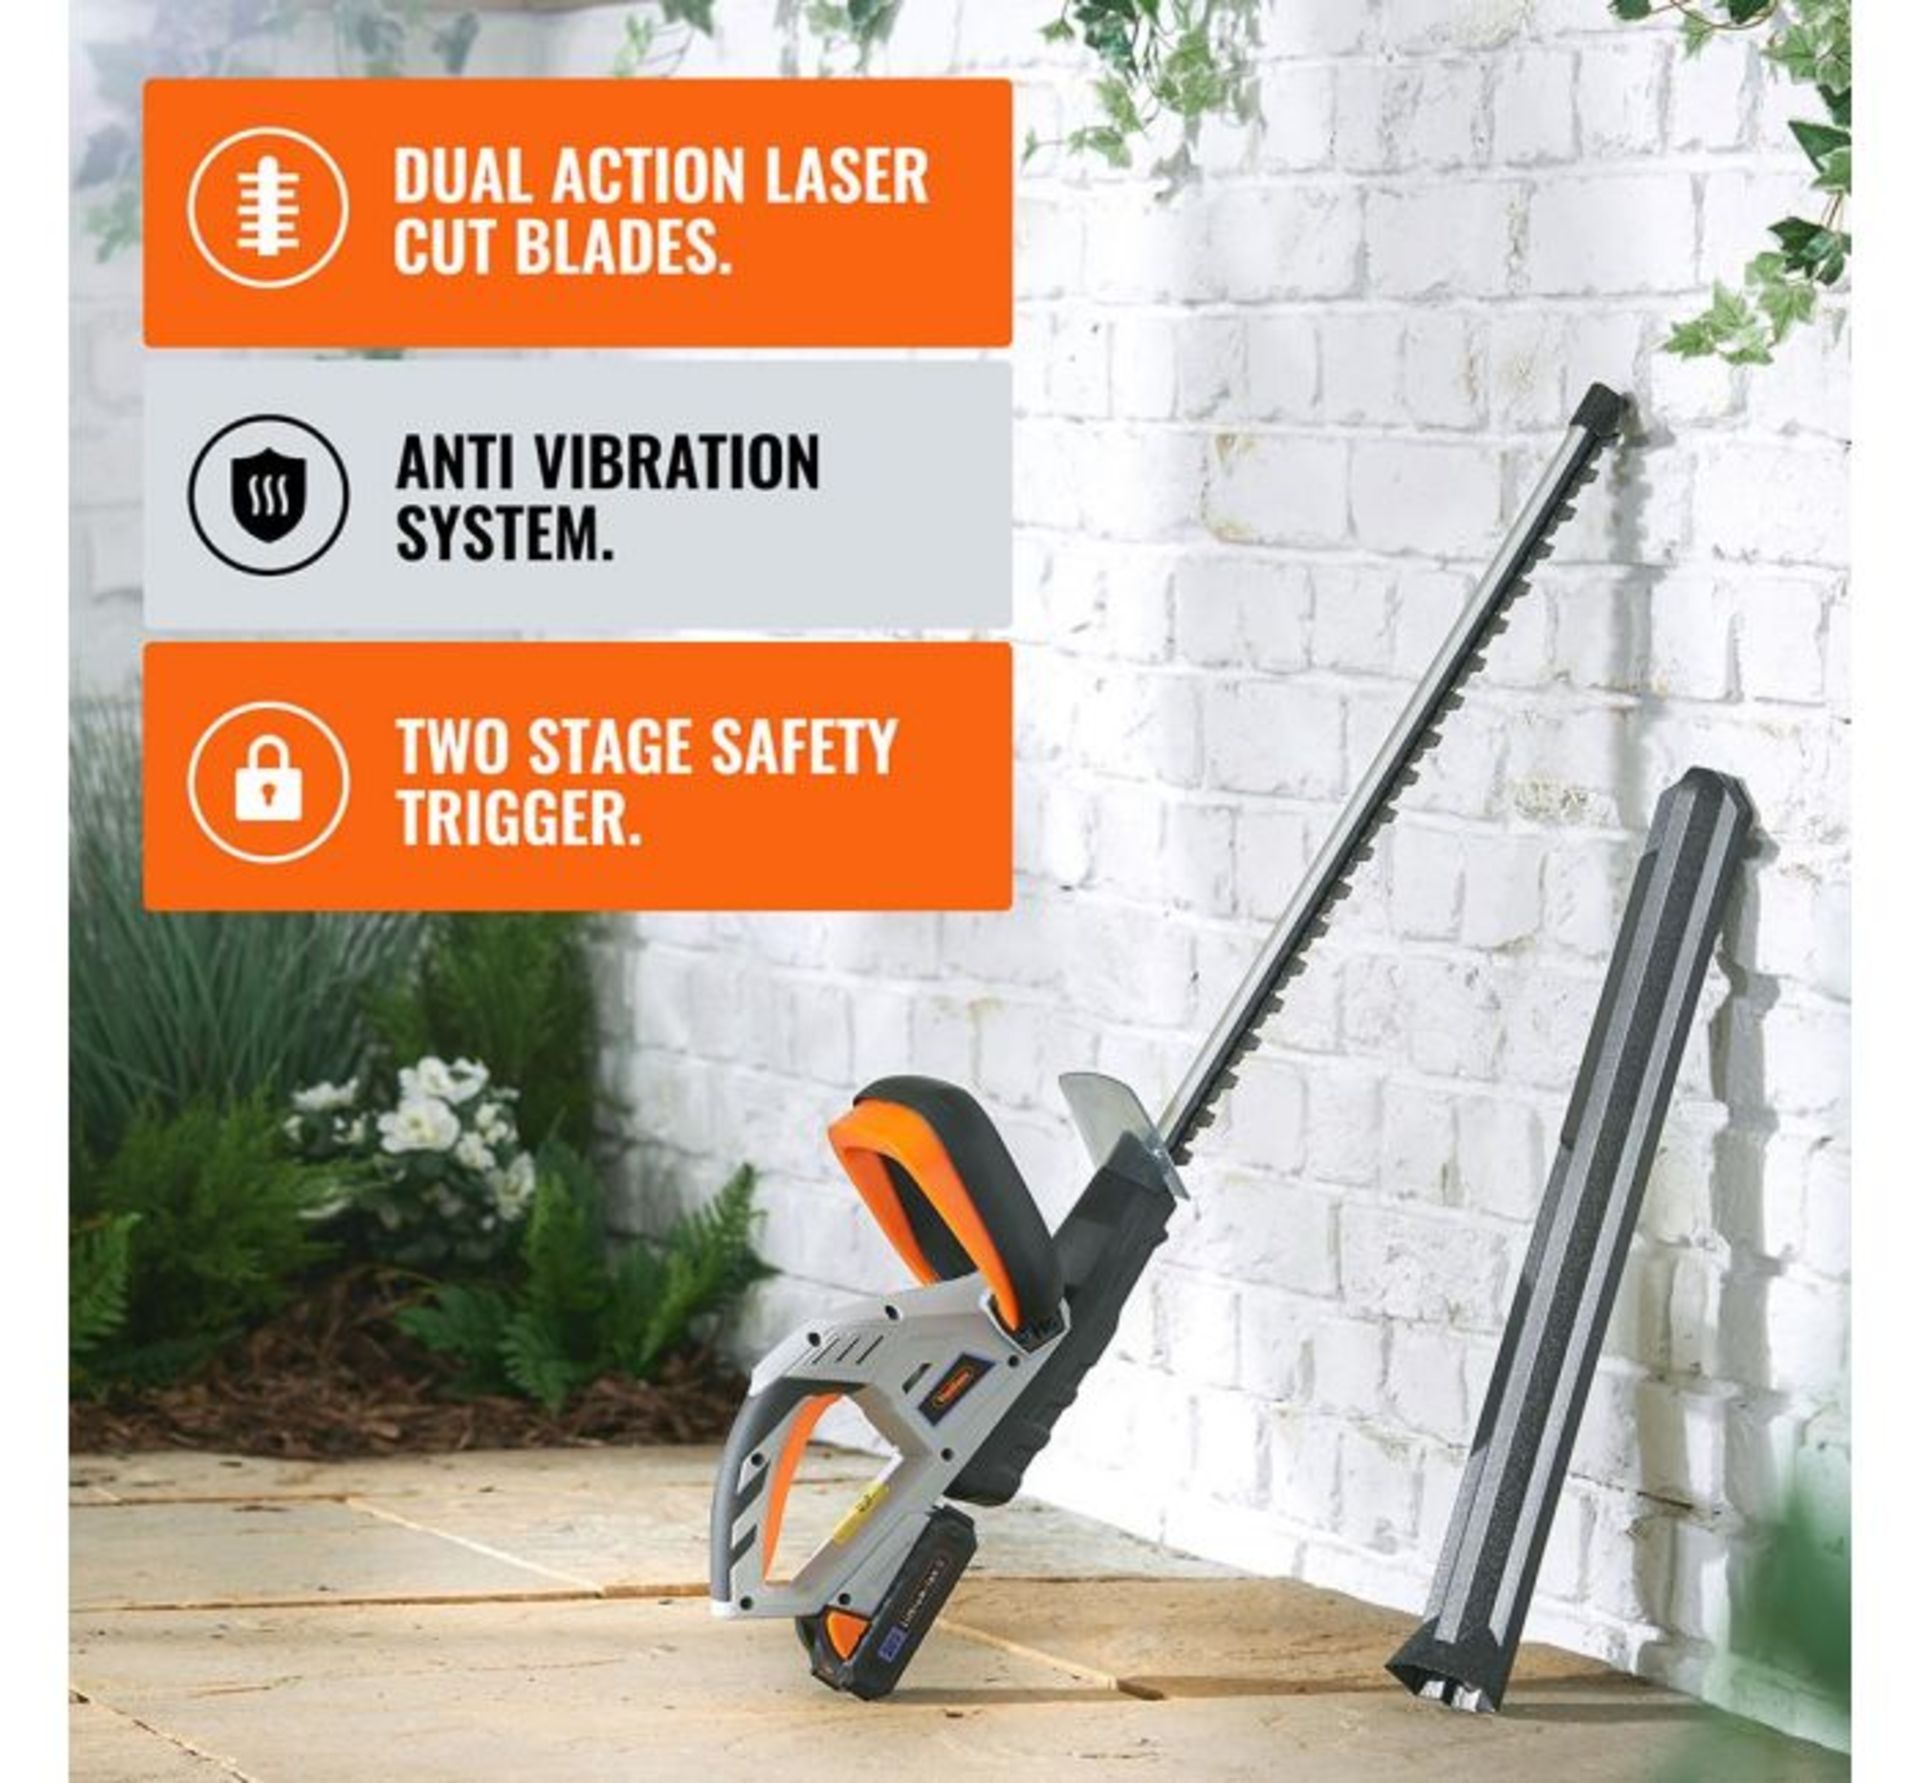 (GL15) 20V Max. Cordless Hedge Trimmer 51cm dual action precision blades for fast cutting acti... - Image 3 of 3